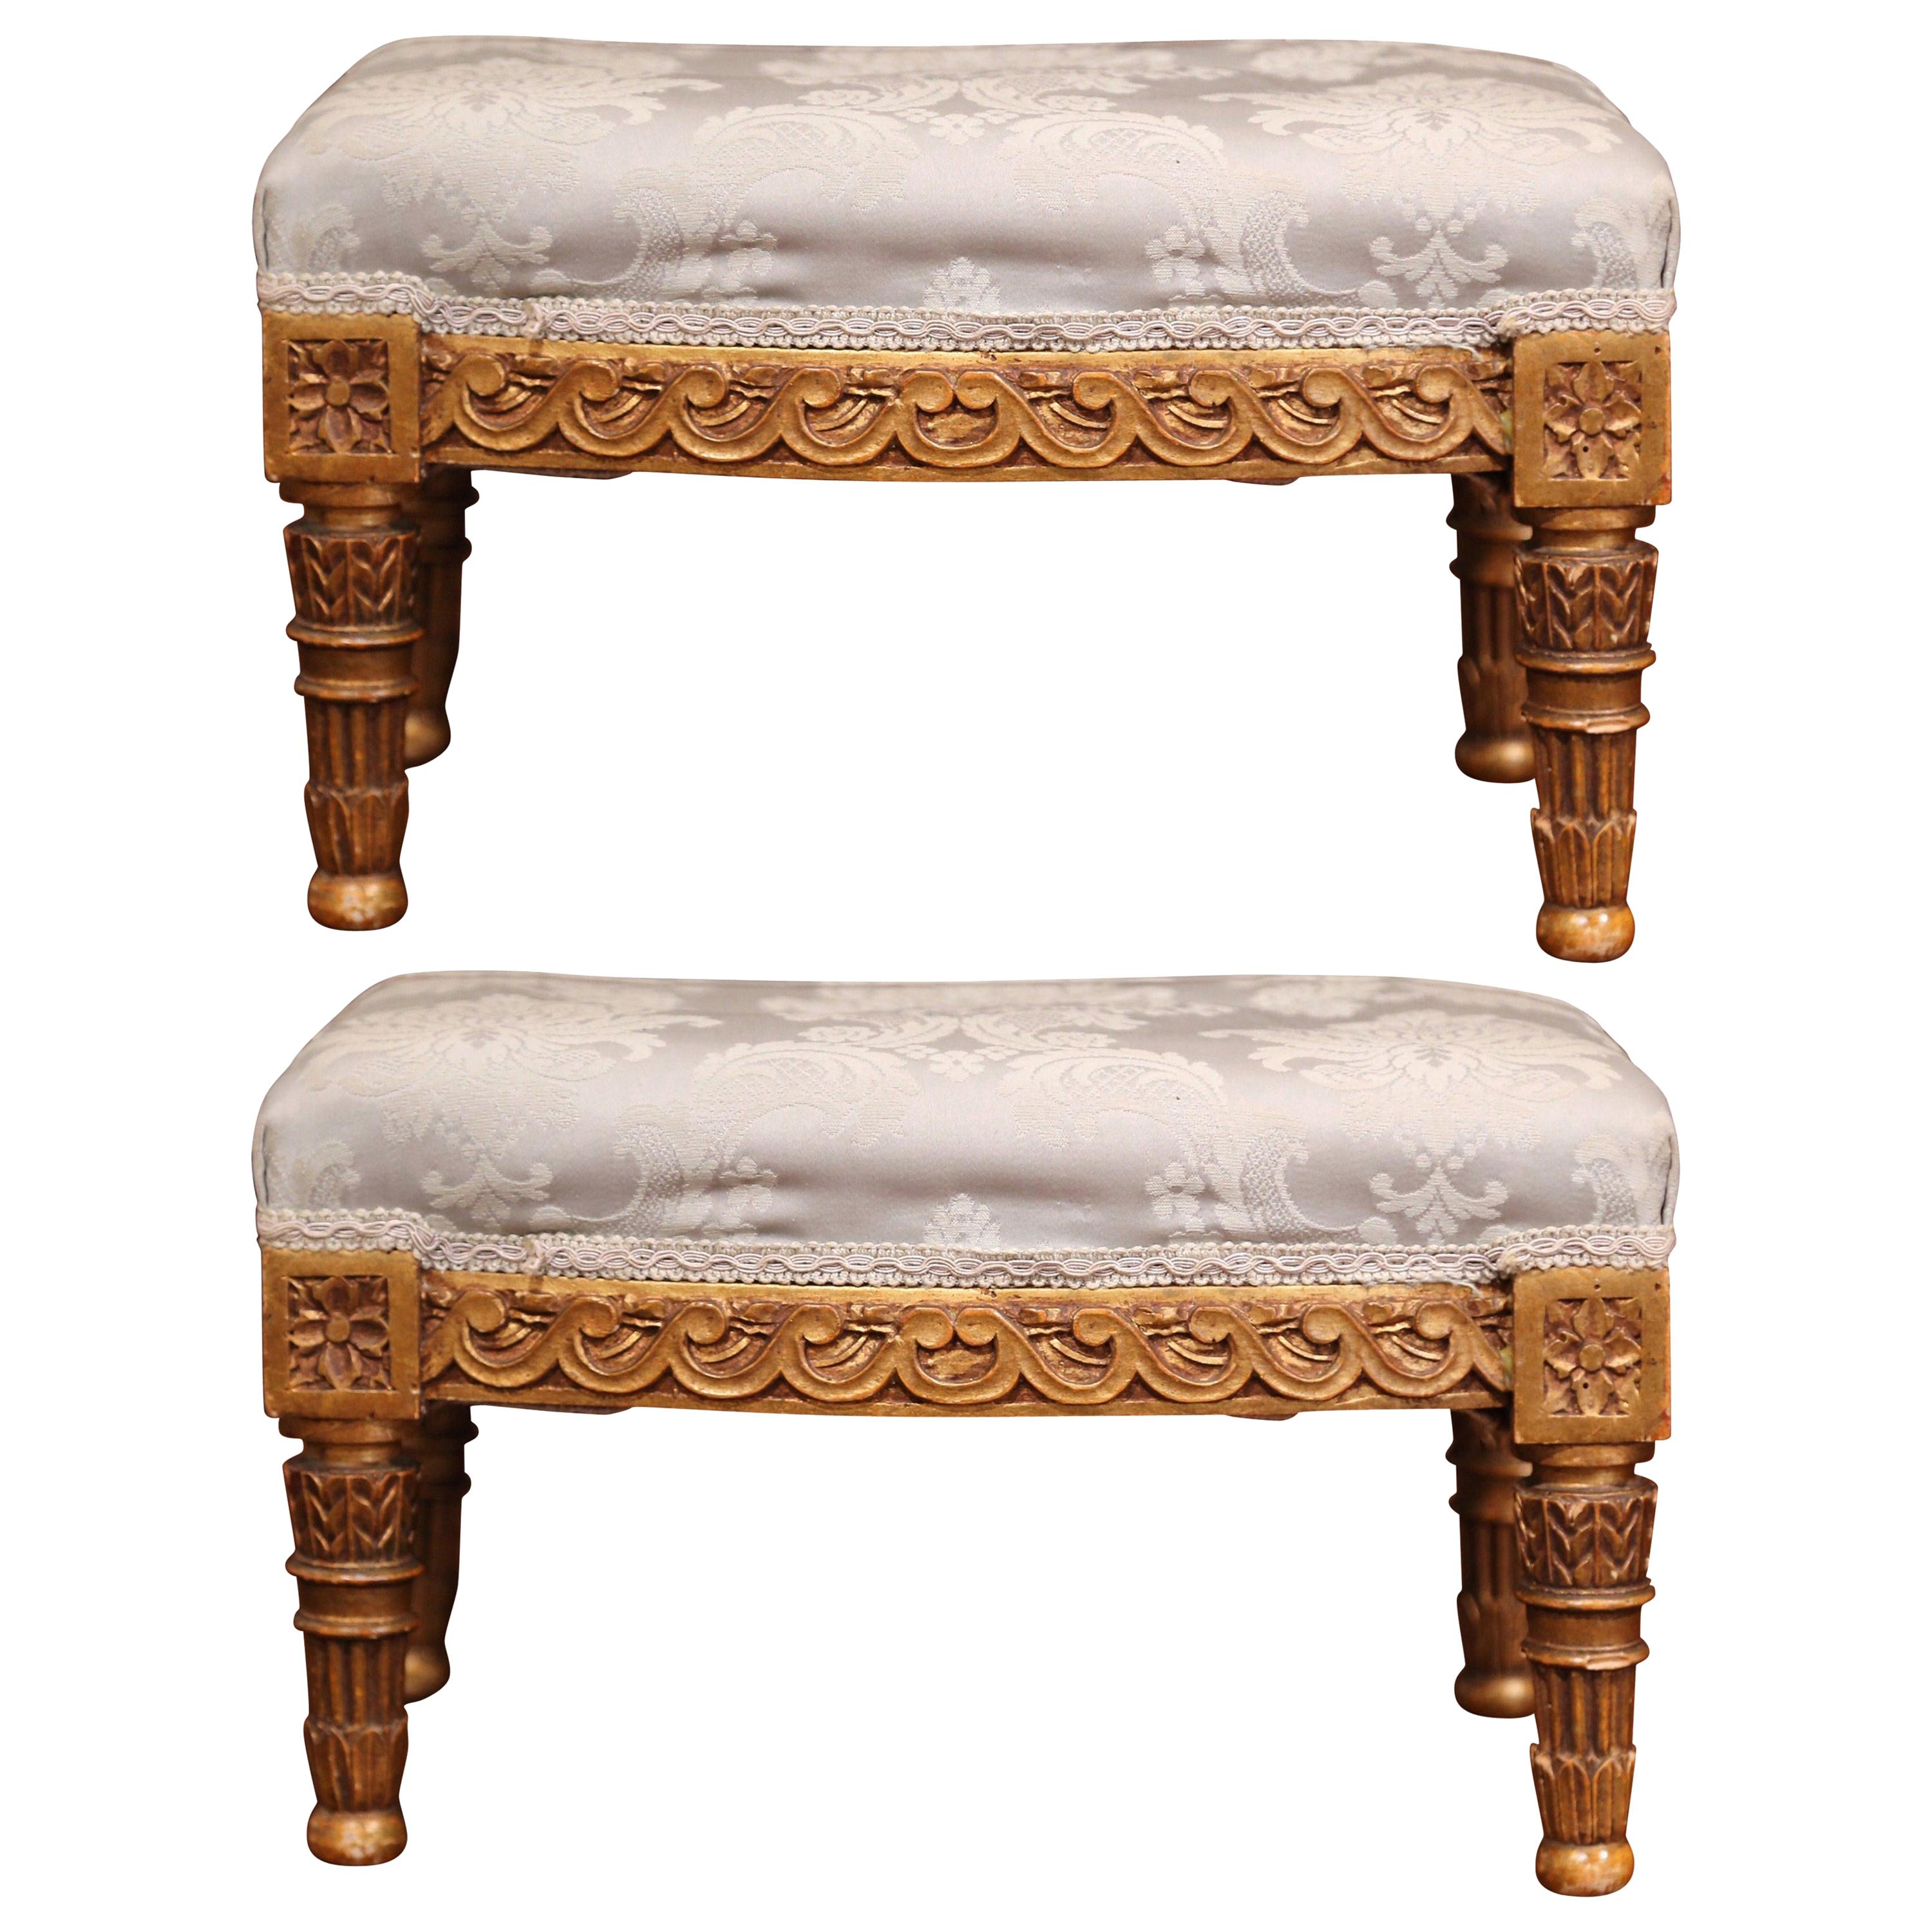 Pair of 19th Century French Louis XVI Carved Giltwood Footstools